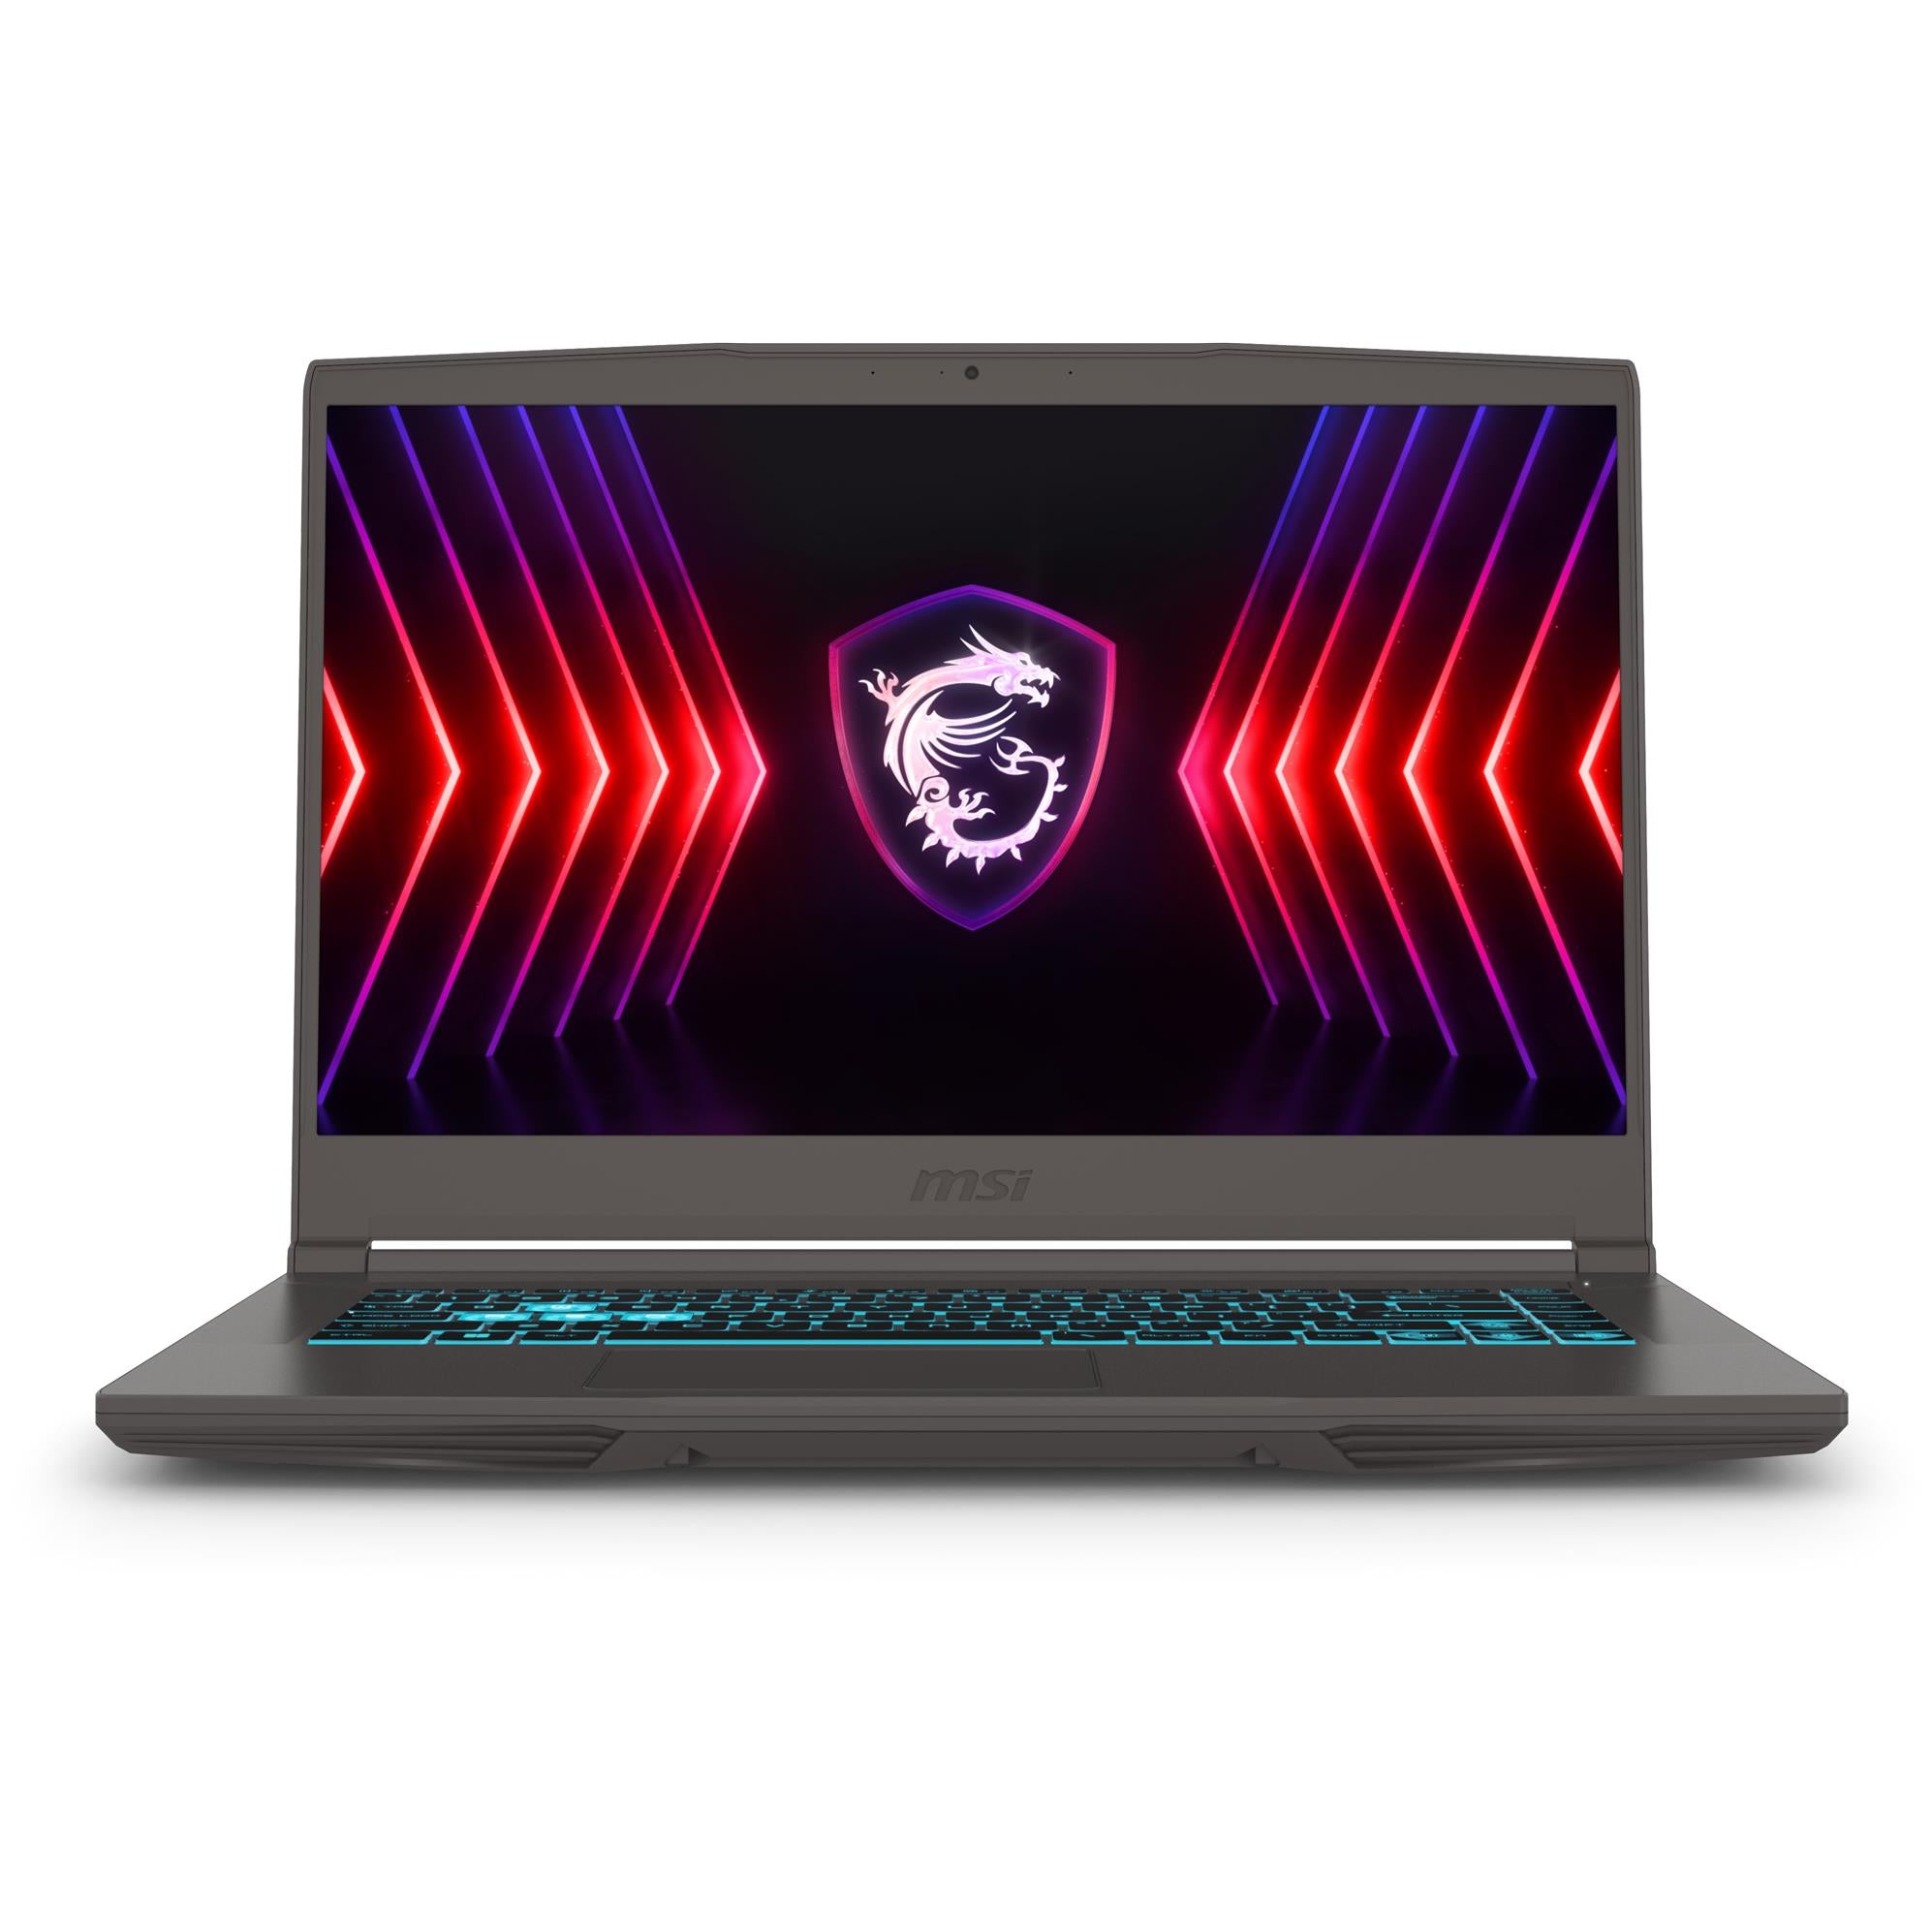 Msi Gs65 Stealth 483 15 6 Ultra Thin And Light 240hz 8ms Gaming Laptop Intel Core I7 9750h Nvidia Geforce Rtx2060 32gb Ddr4